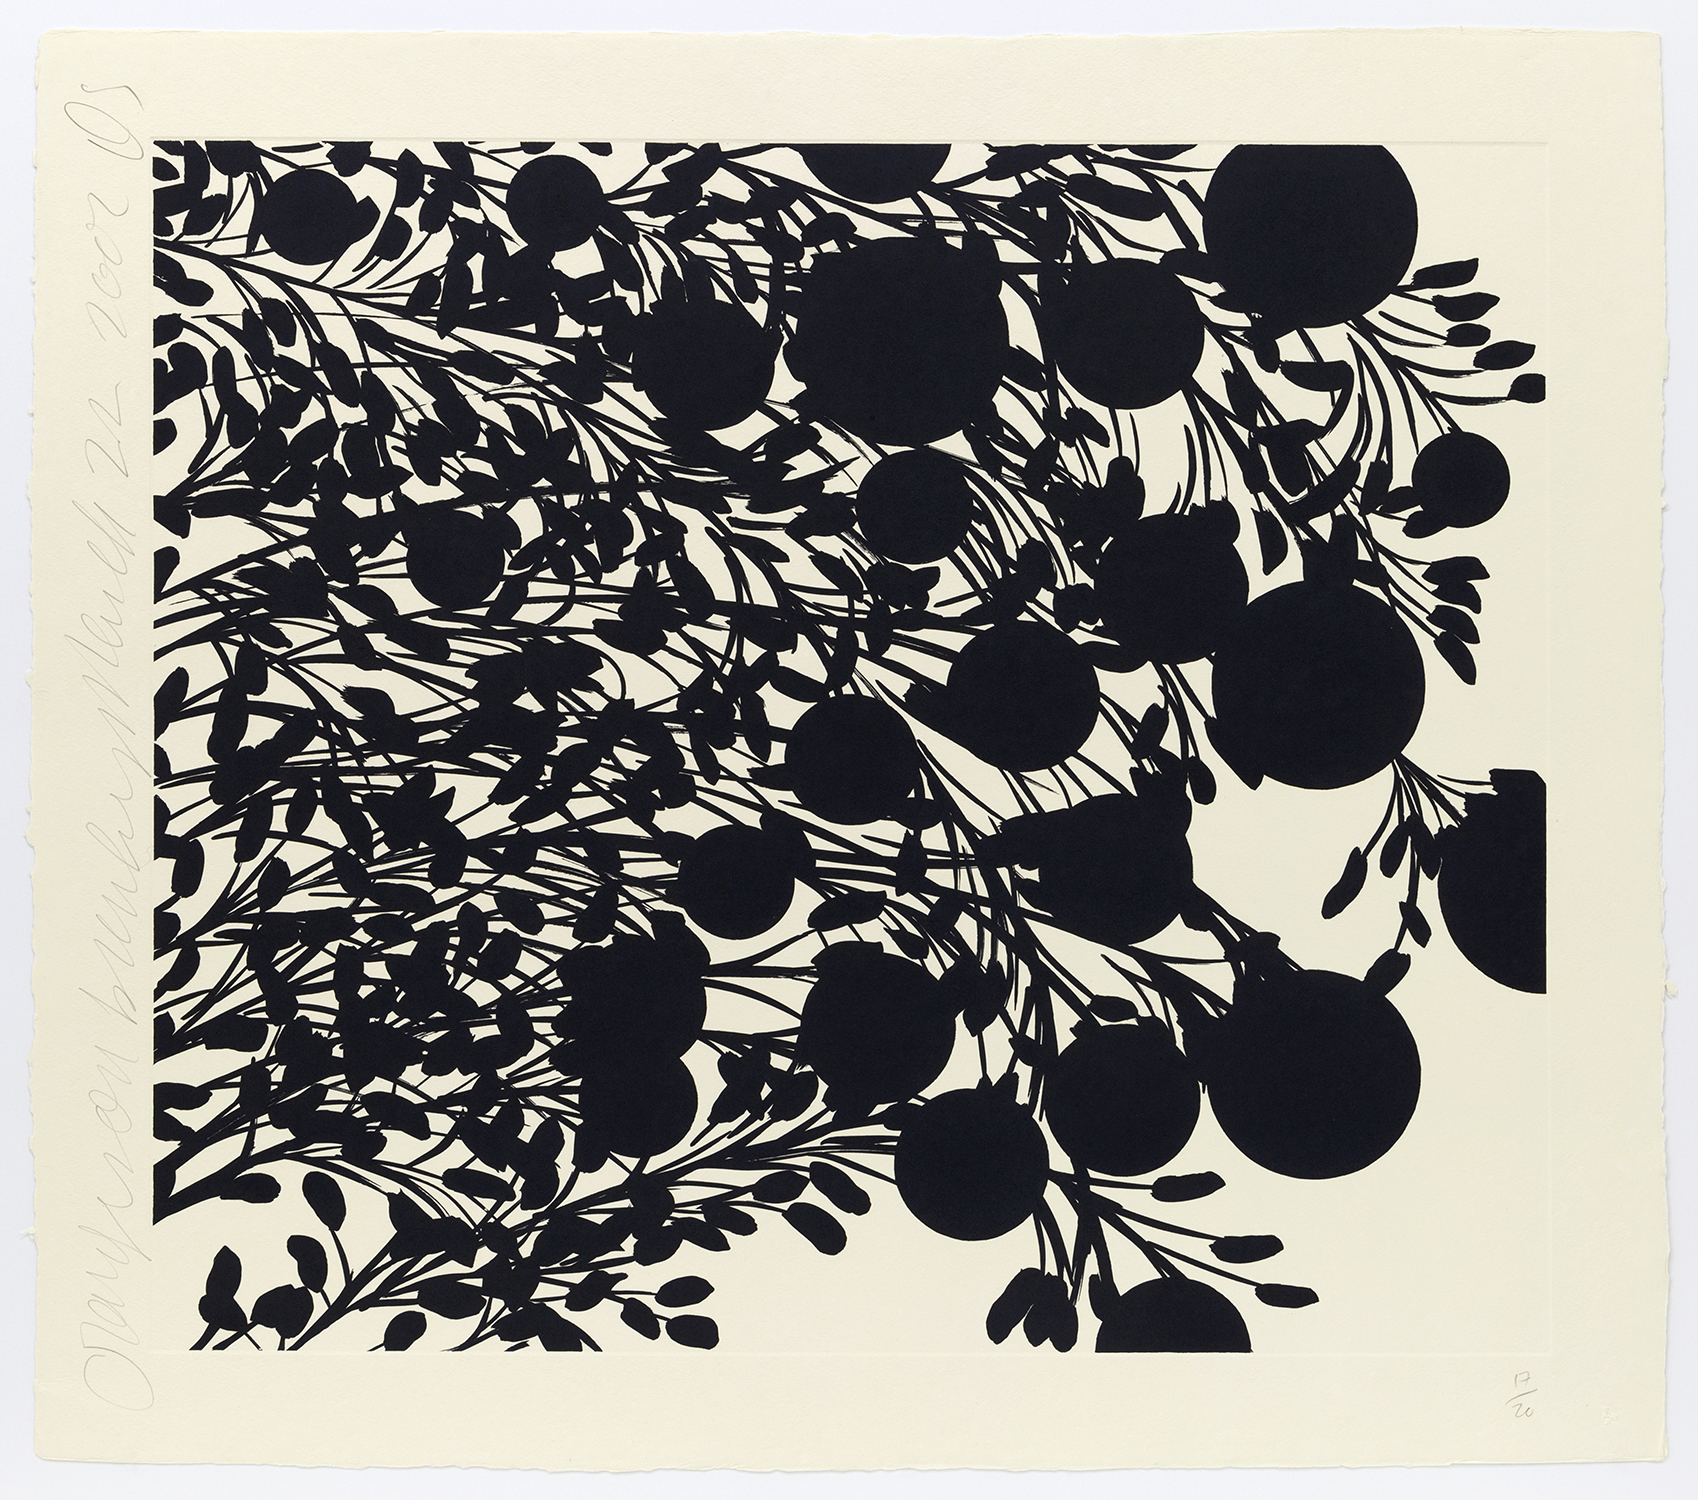 Oranges on Branches, March 22, 2002, 2002, Etching on handmade paper, 37 x 41 inches (94 x 104.1 cm), Edition of 20